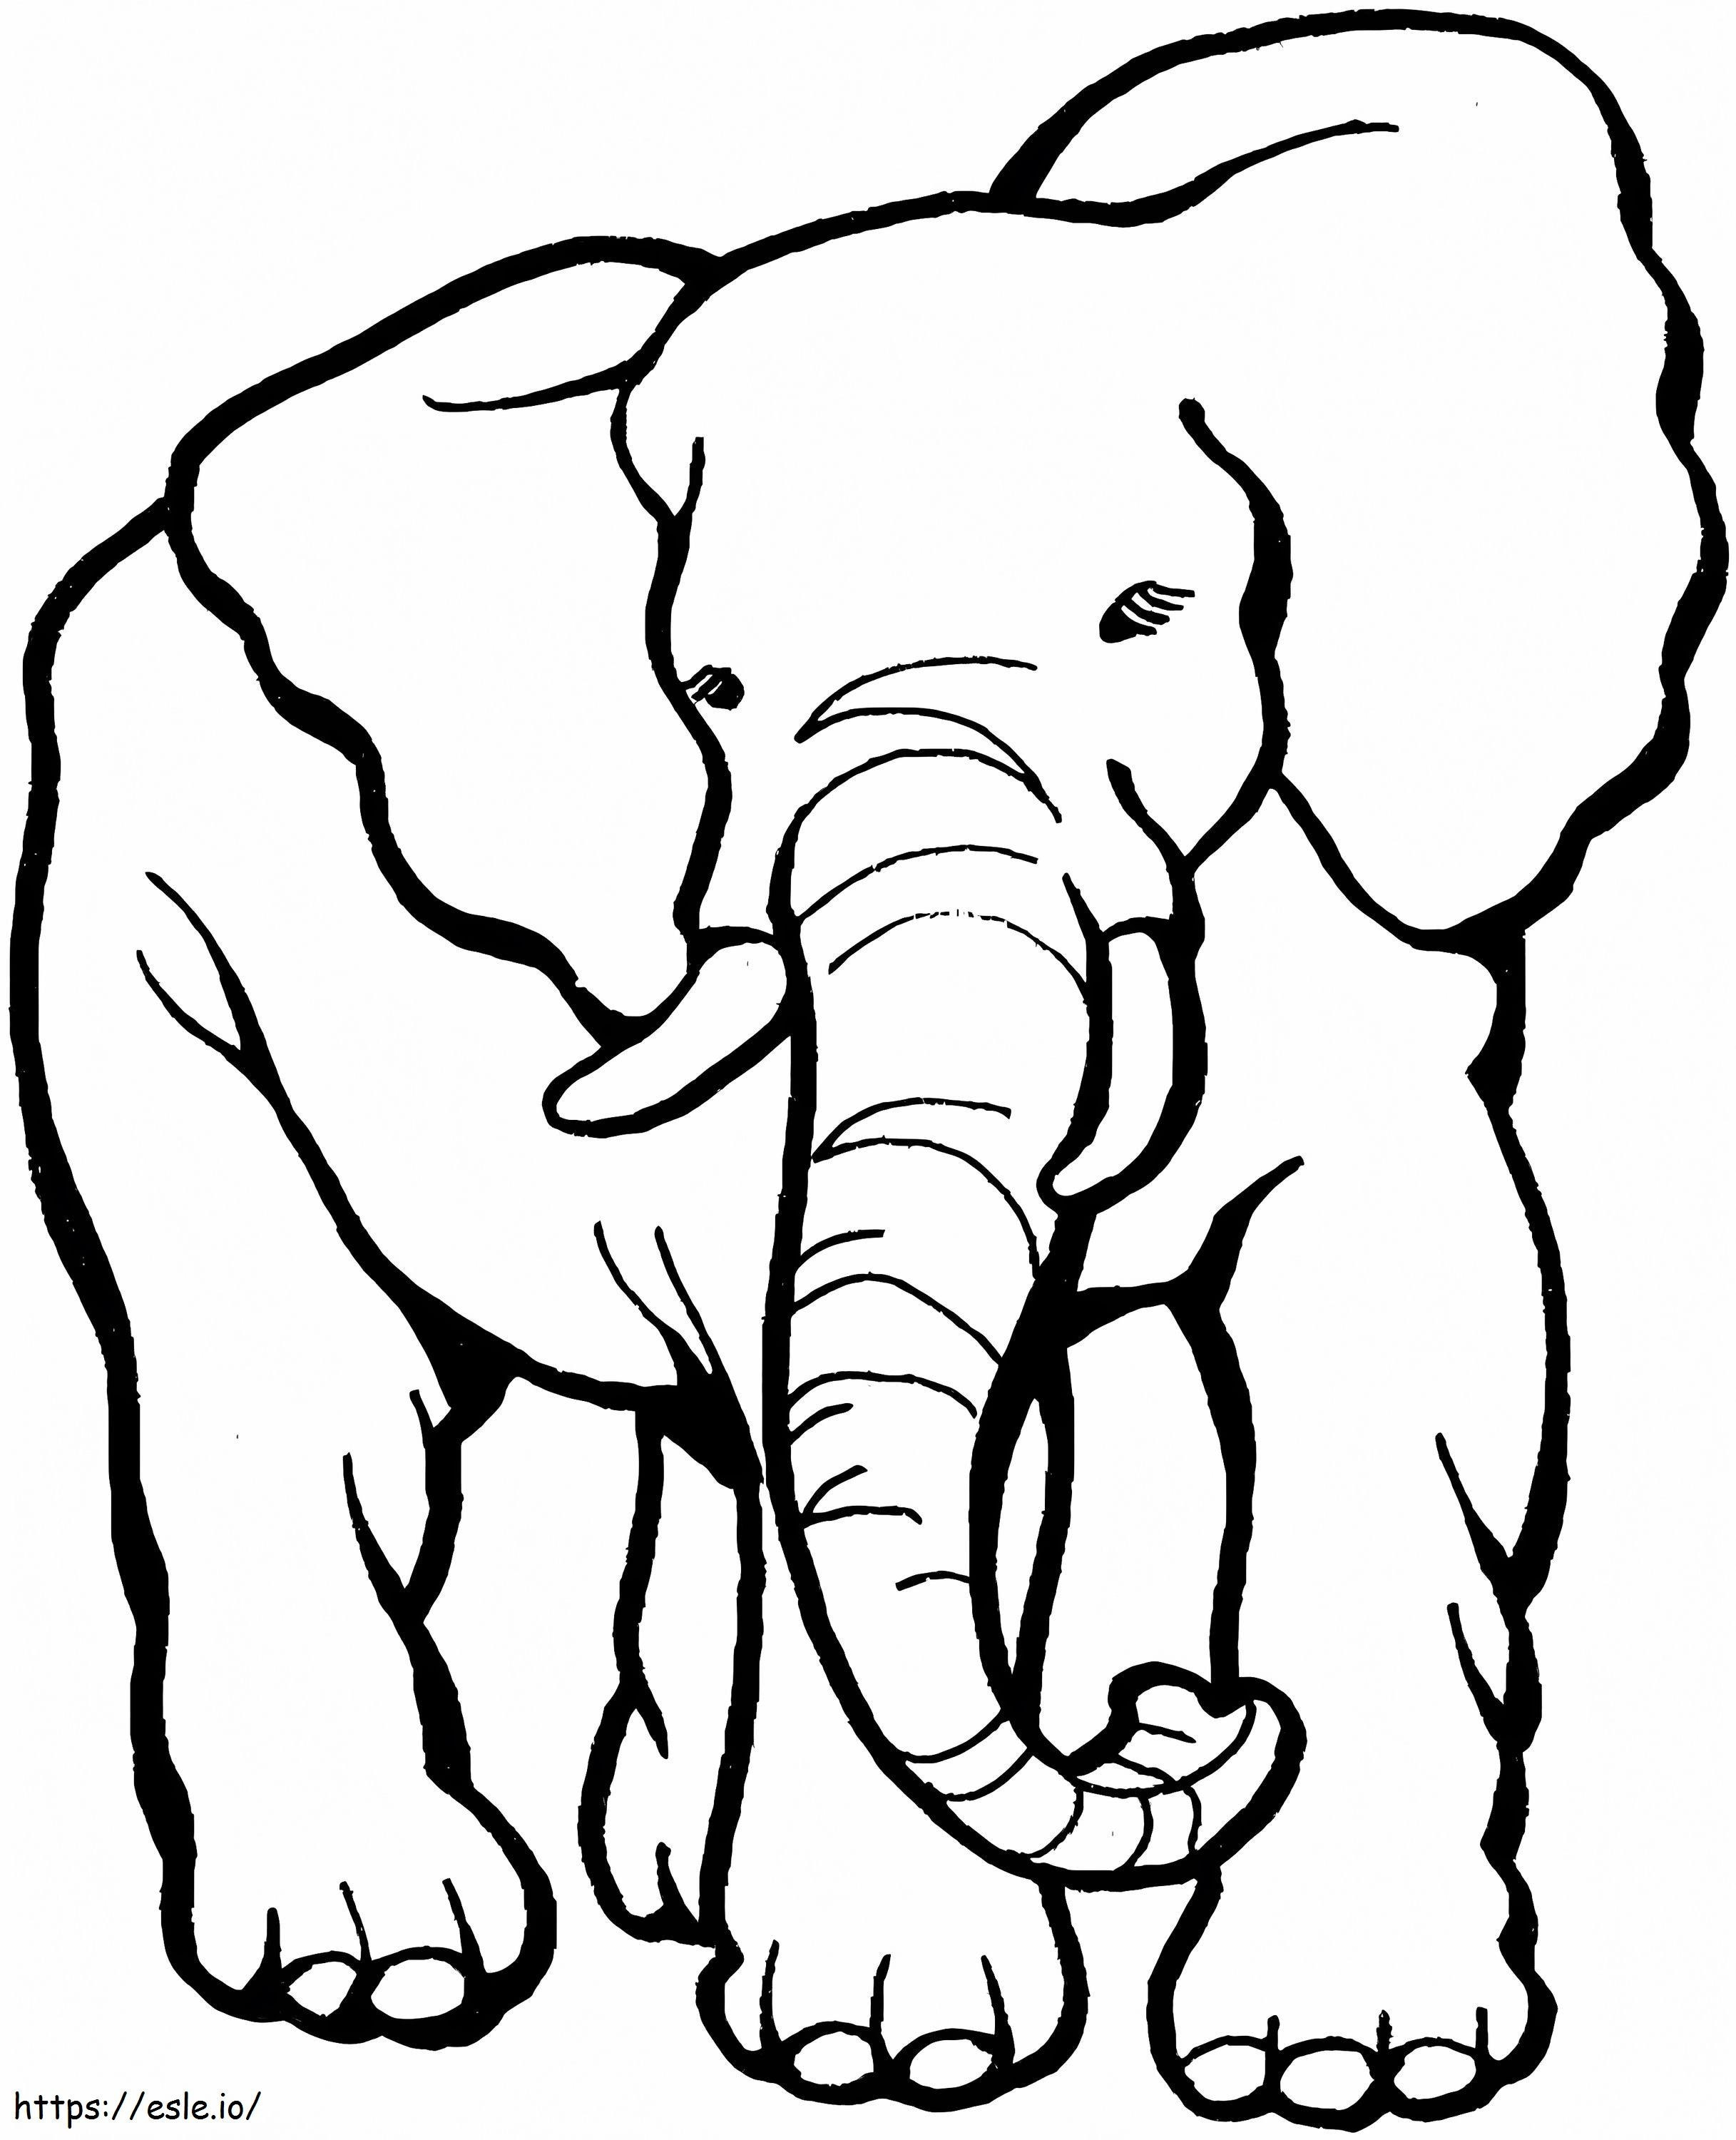 An Elephant coloring page